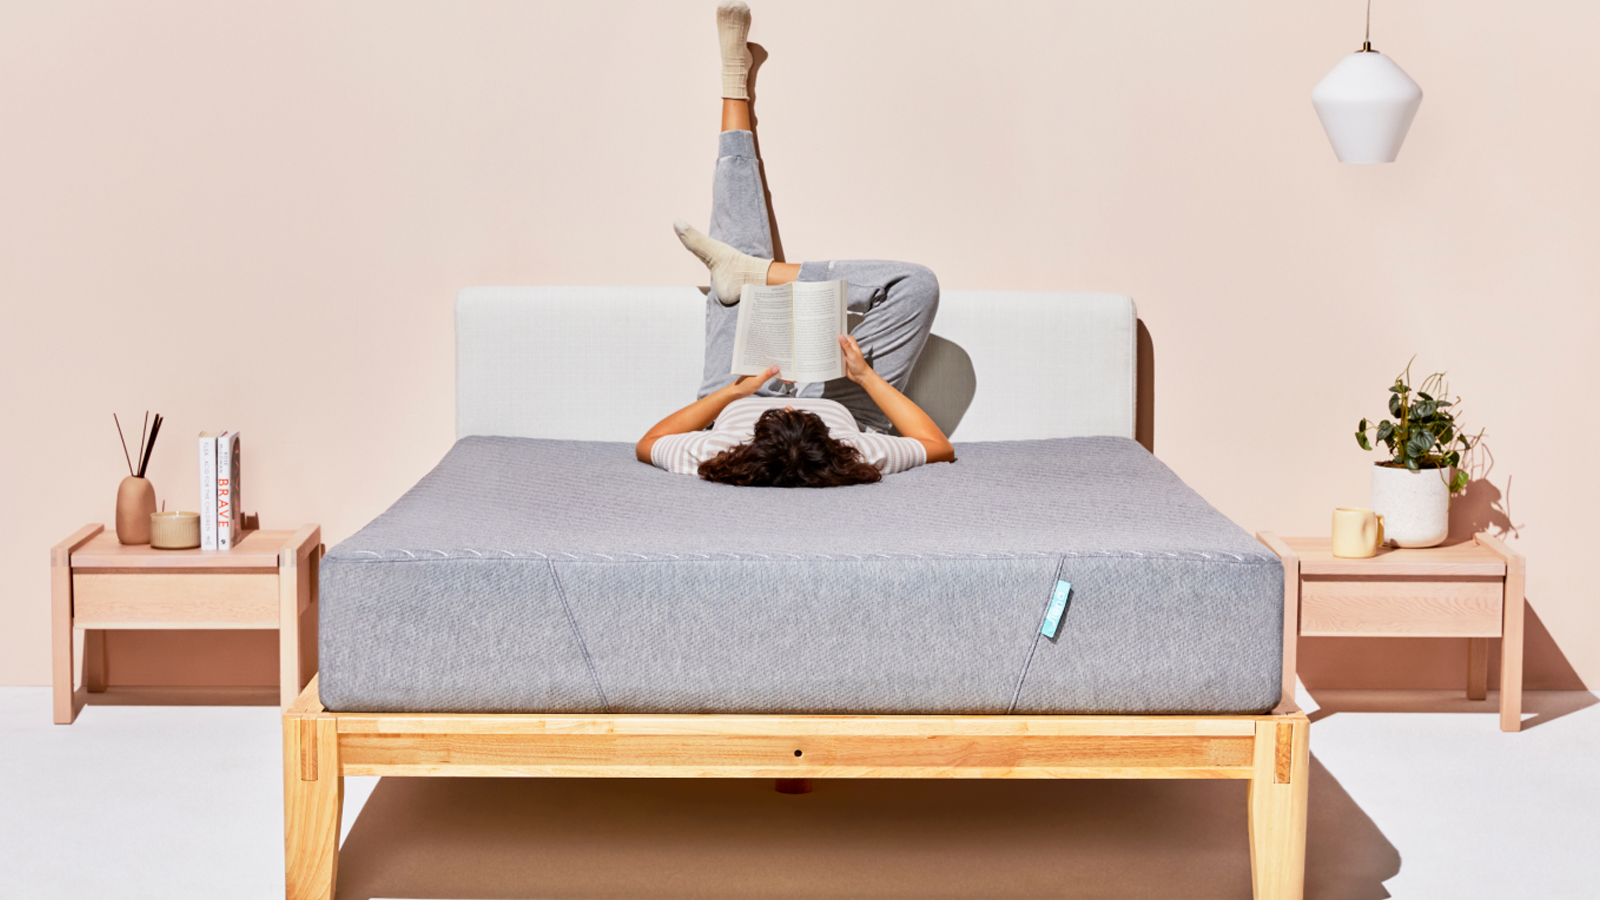 Siena Sleep memory foam mattress, featuring a person lying upside on the bed reading a book